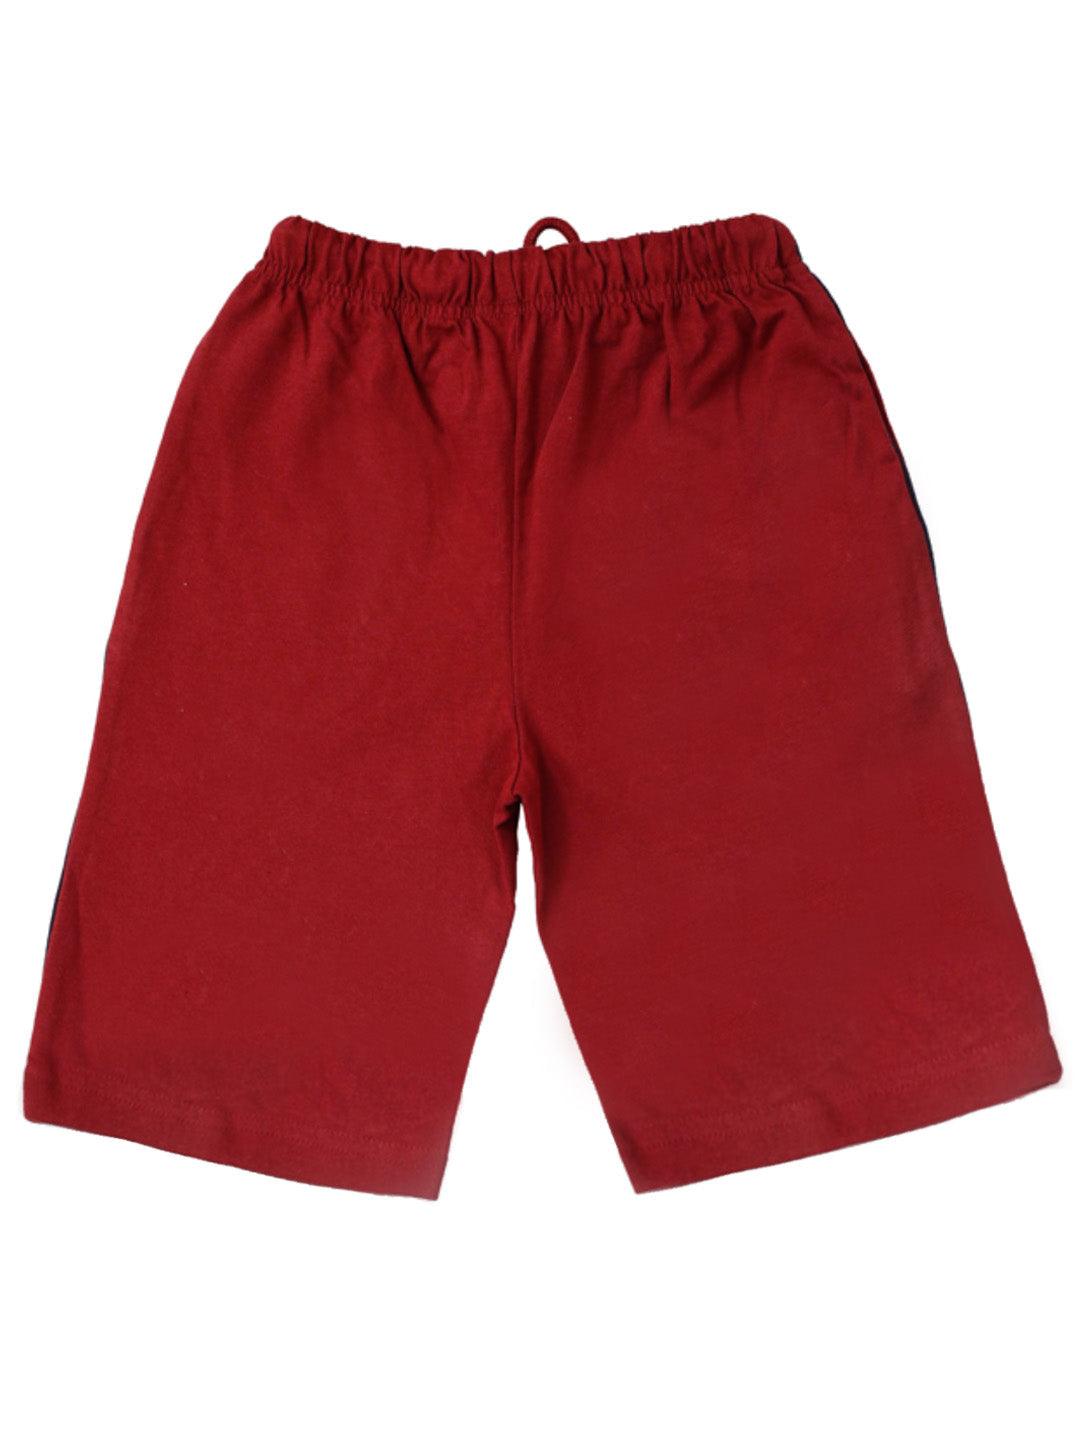 All Stars Maroon Shorts - Juscubs